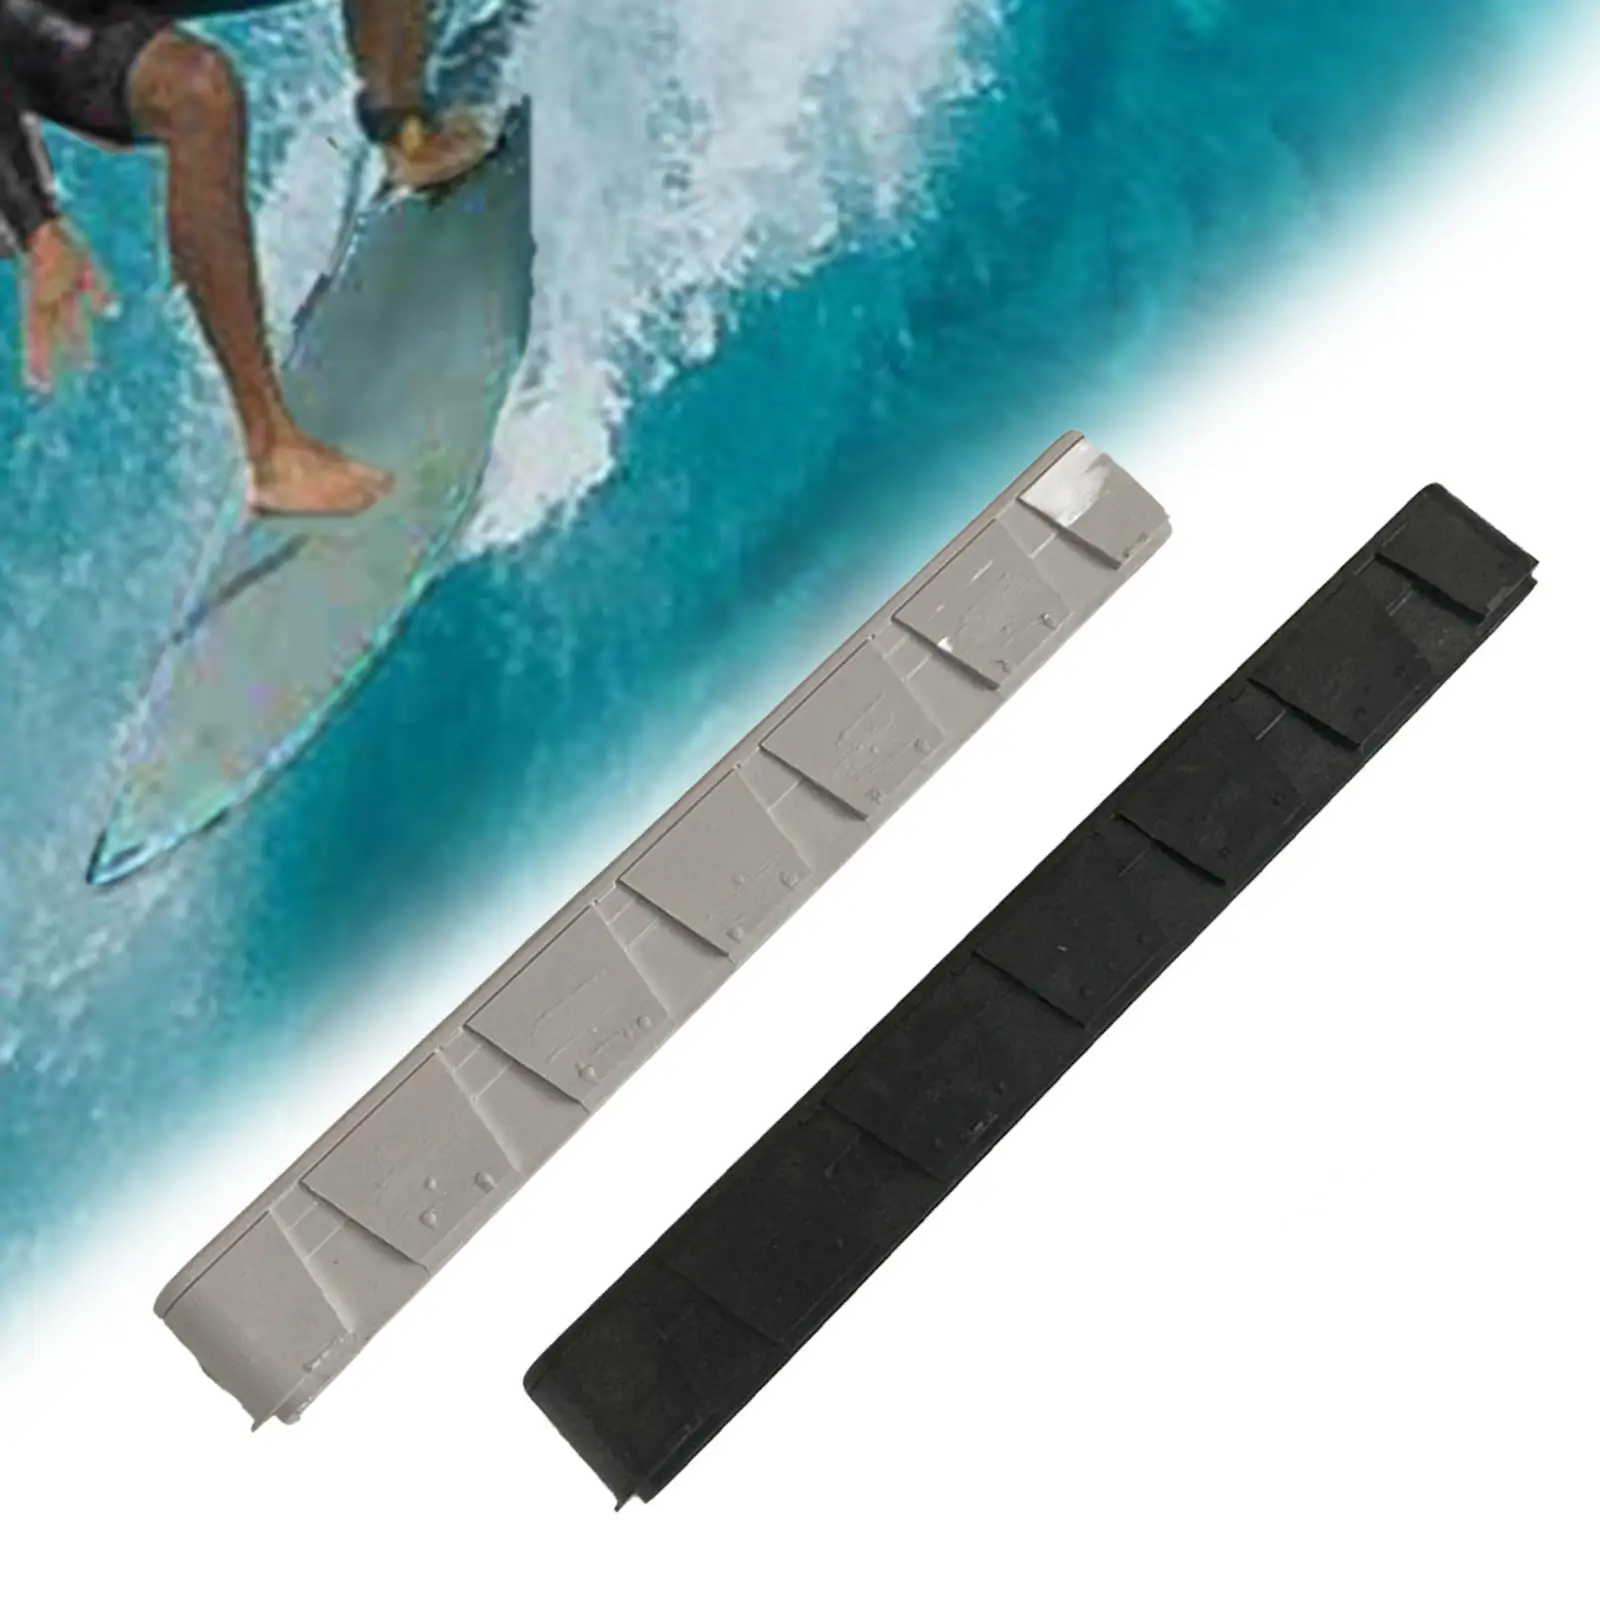 Surfboard Fins Box Easy to Install Durable Portable Longboard Fin Box for Water Sports Paddleboard Surfboard Surfing Accessories